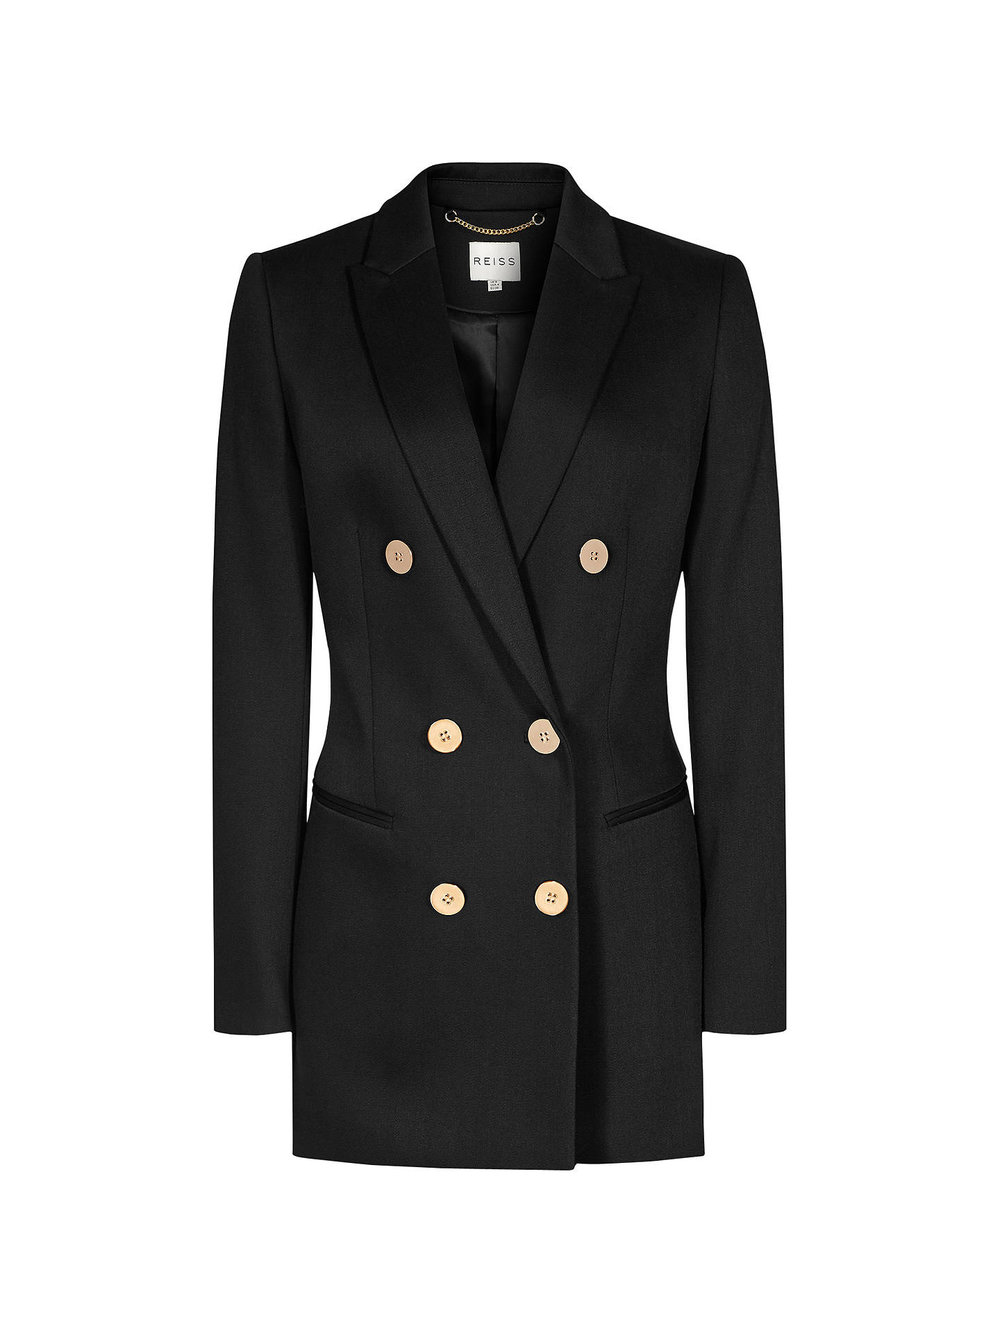 Reiss Lavinnia Double Breasted Jacket in Black — UFO No More